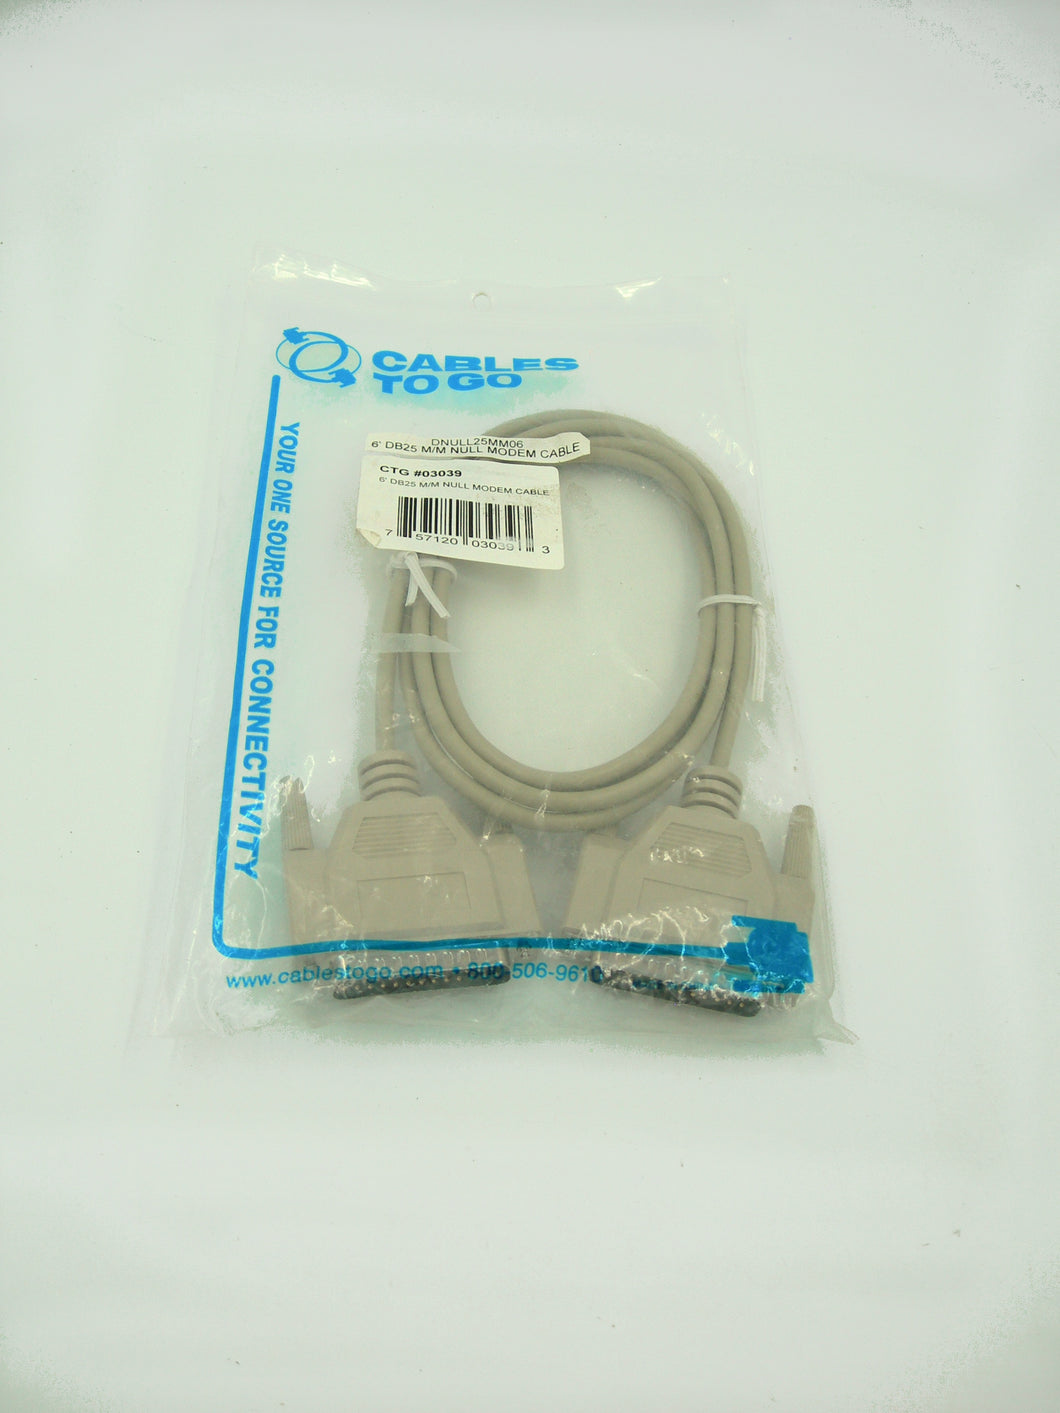 Cable, RS232 - db25 null modem